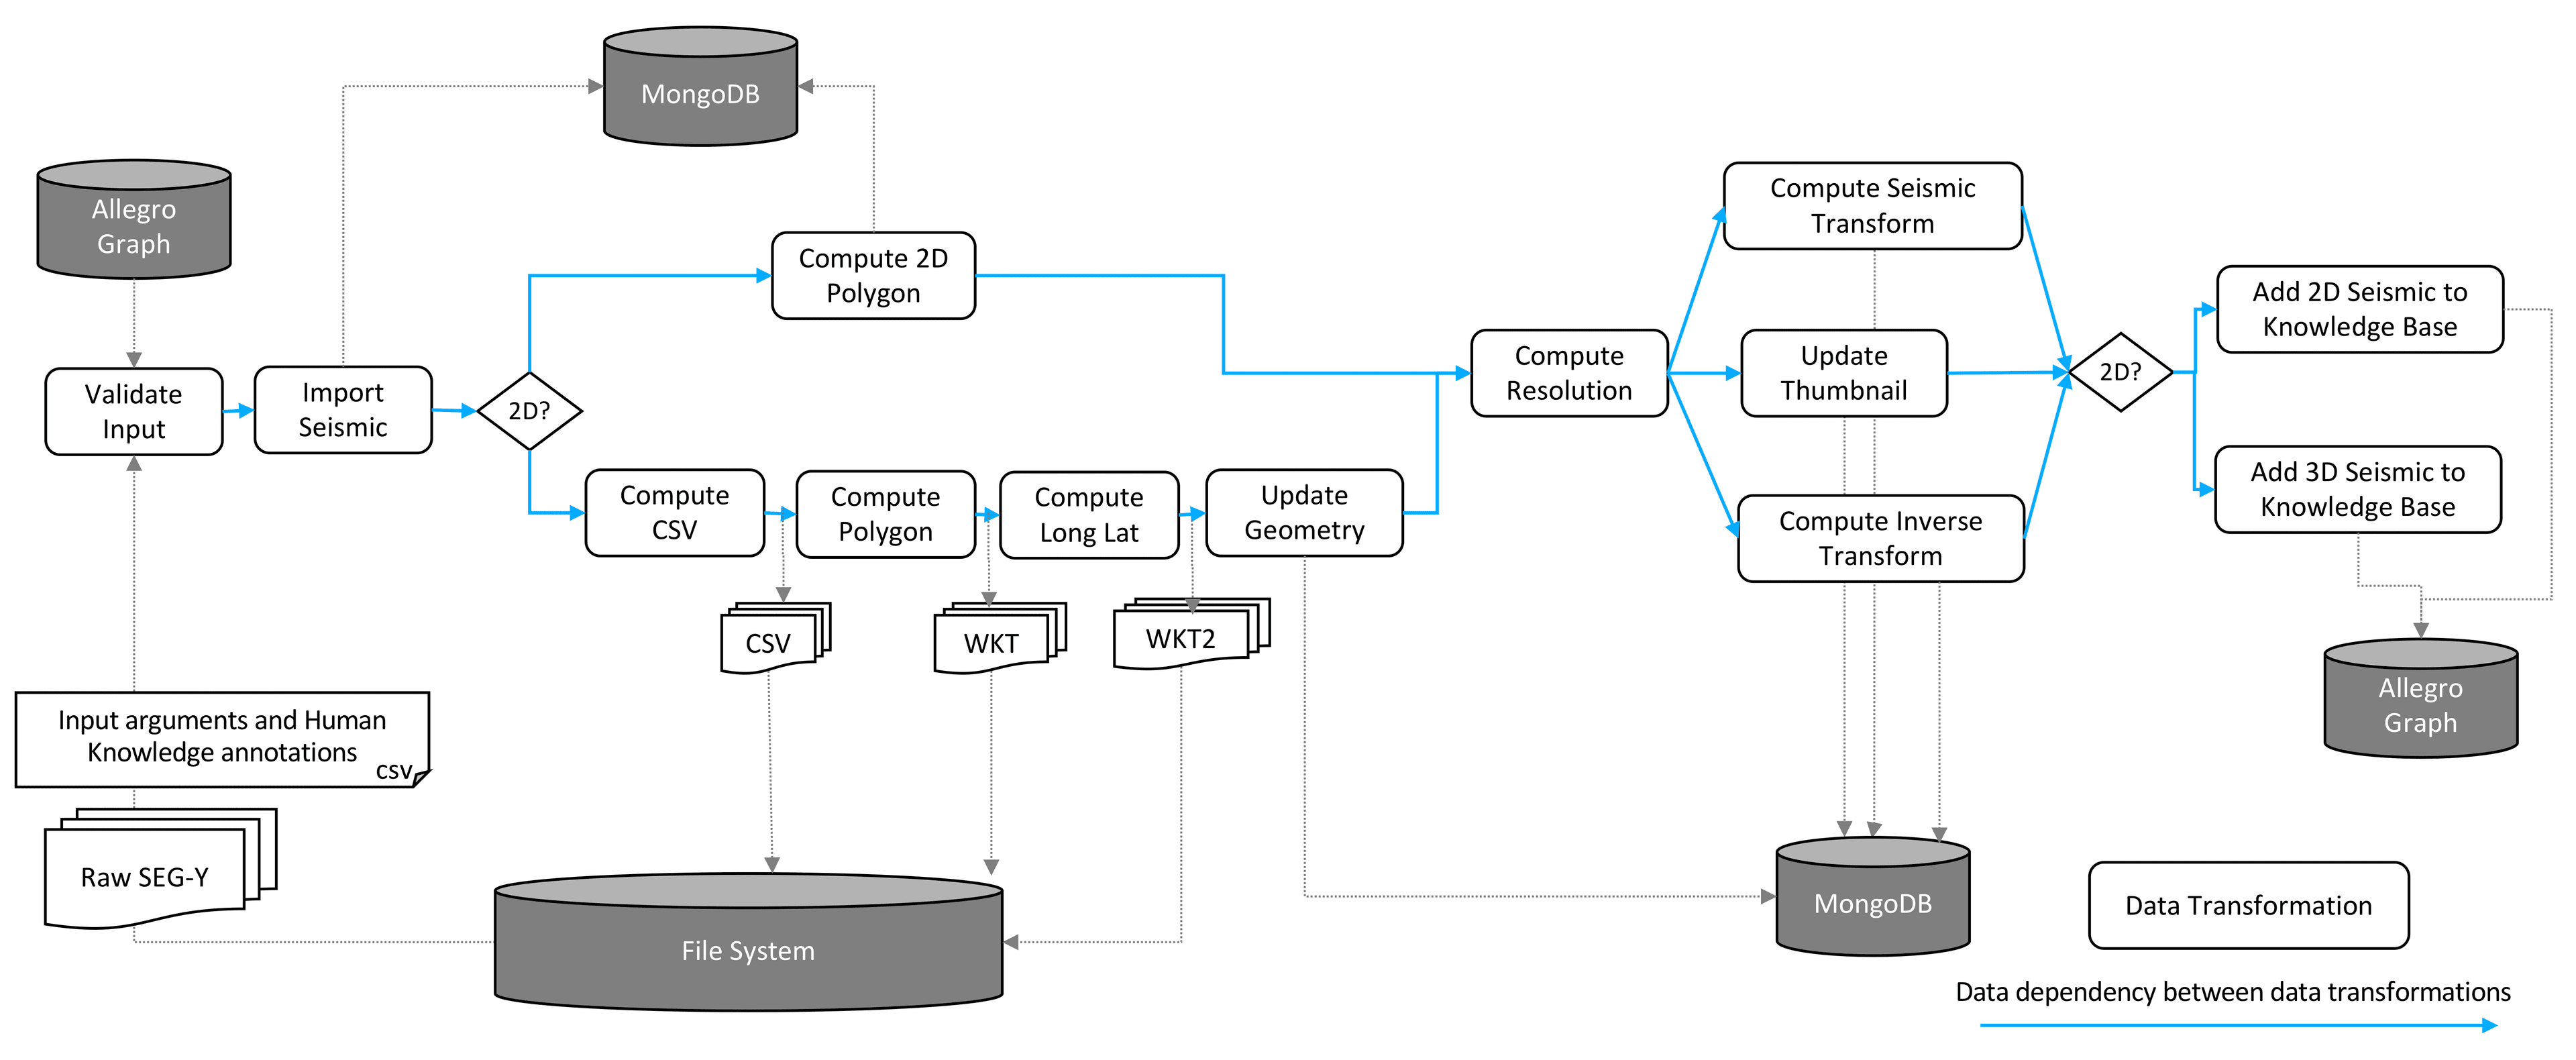 Deep dive into Workflow 2 - engineering schematic drawing